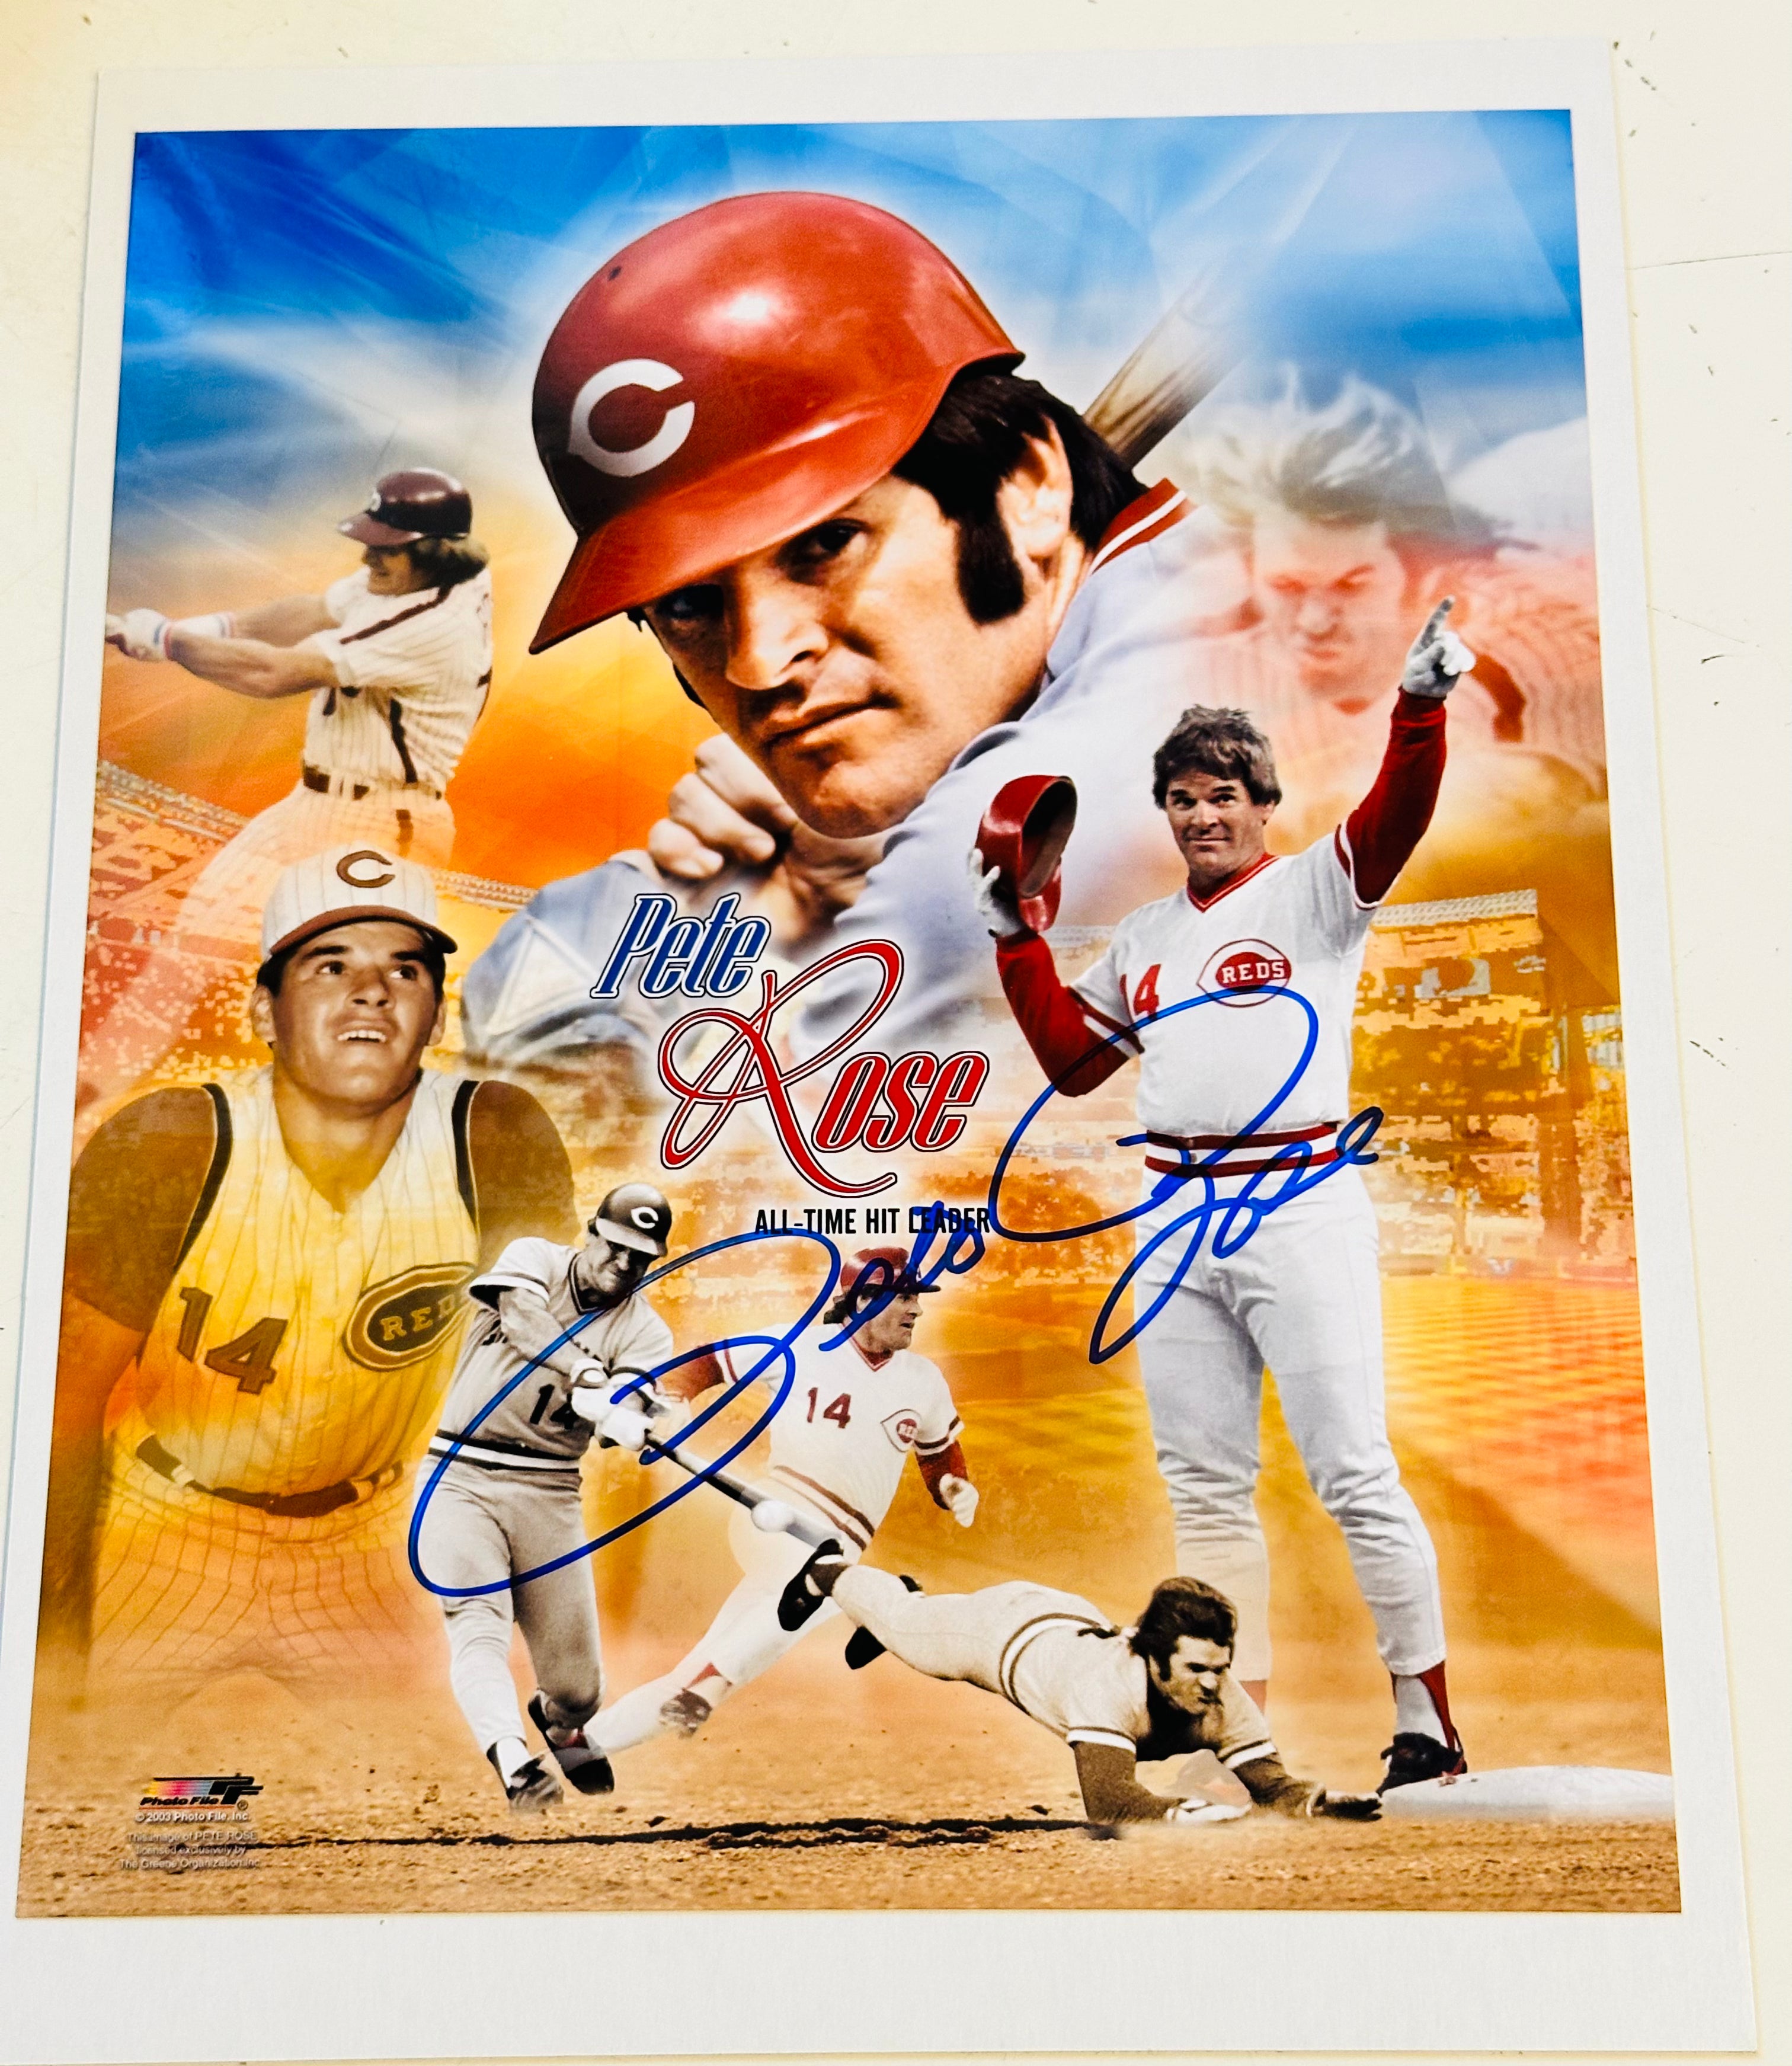 Pete Rose baseball legend signed 8x10 photo sold with COA